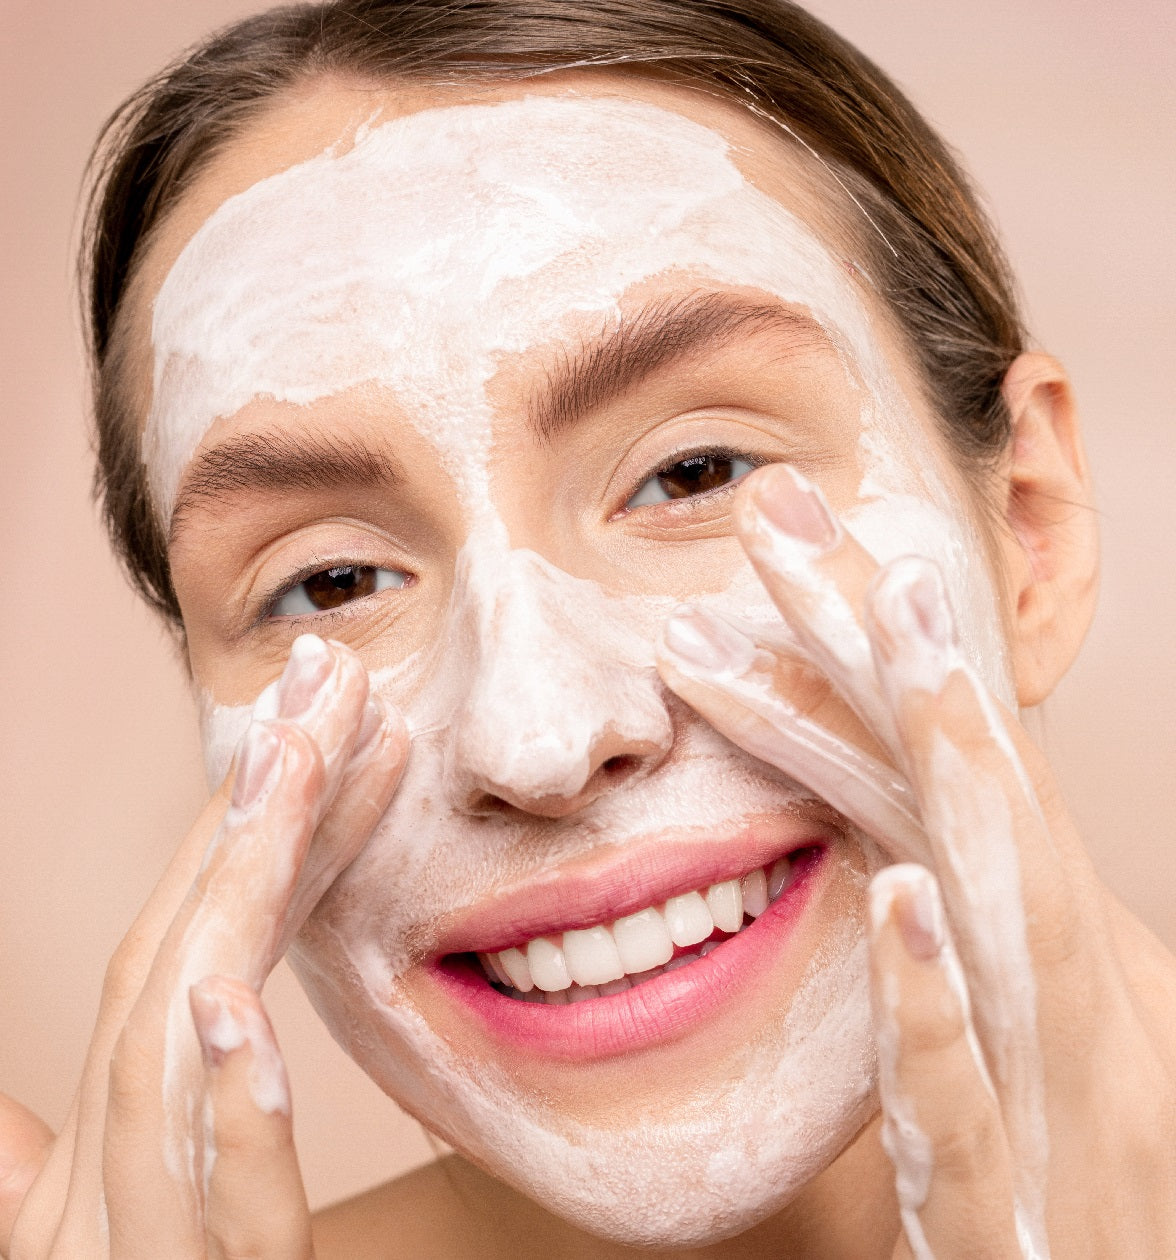 Anti-Aging Face Washes & Cleansers